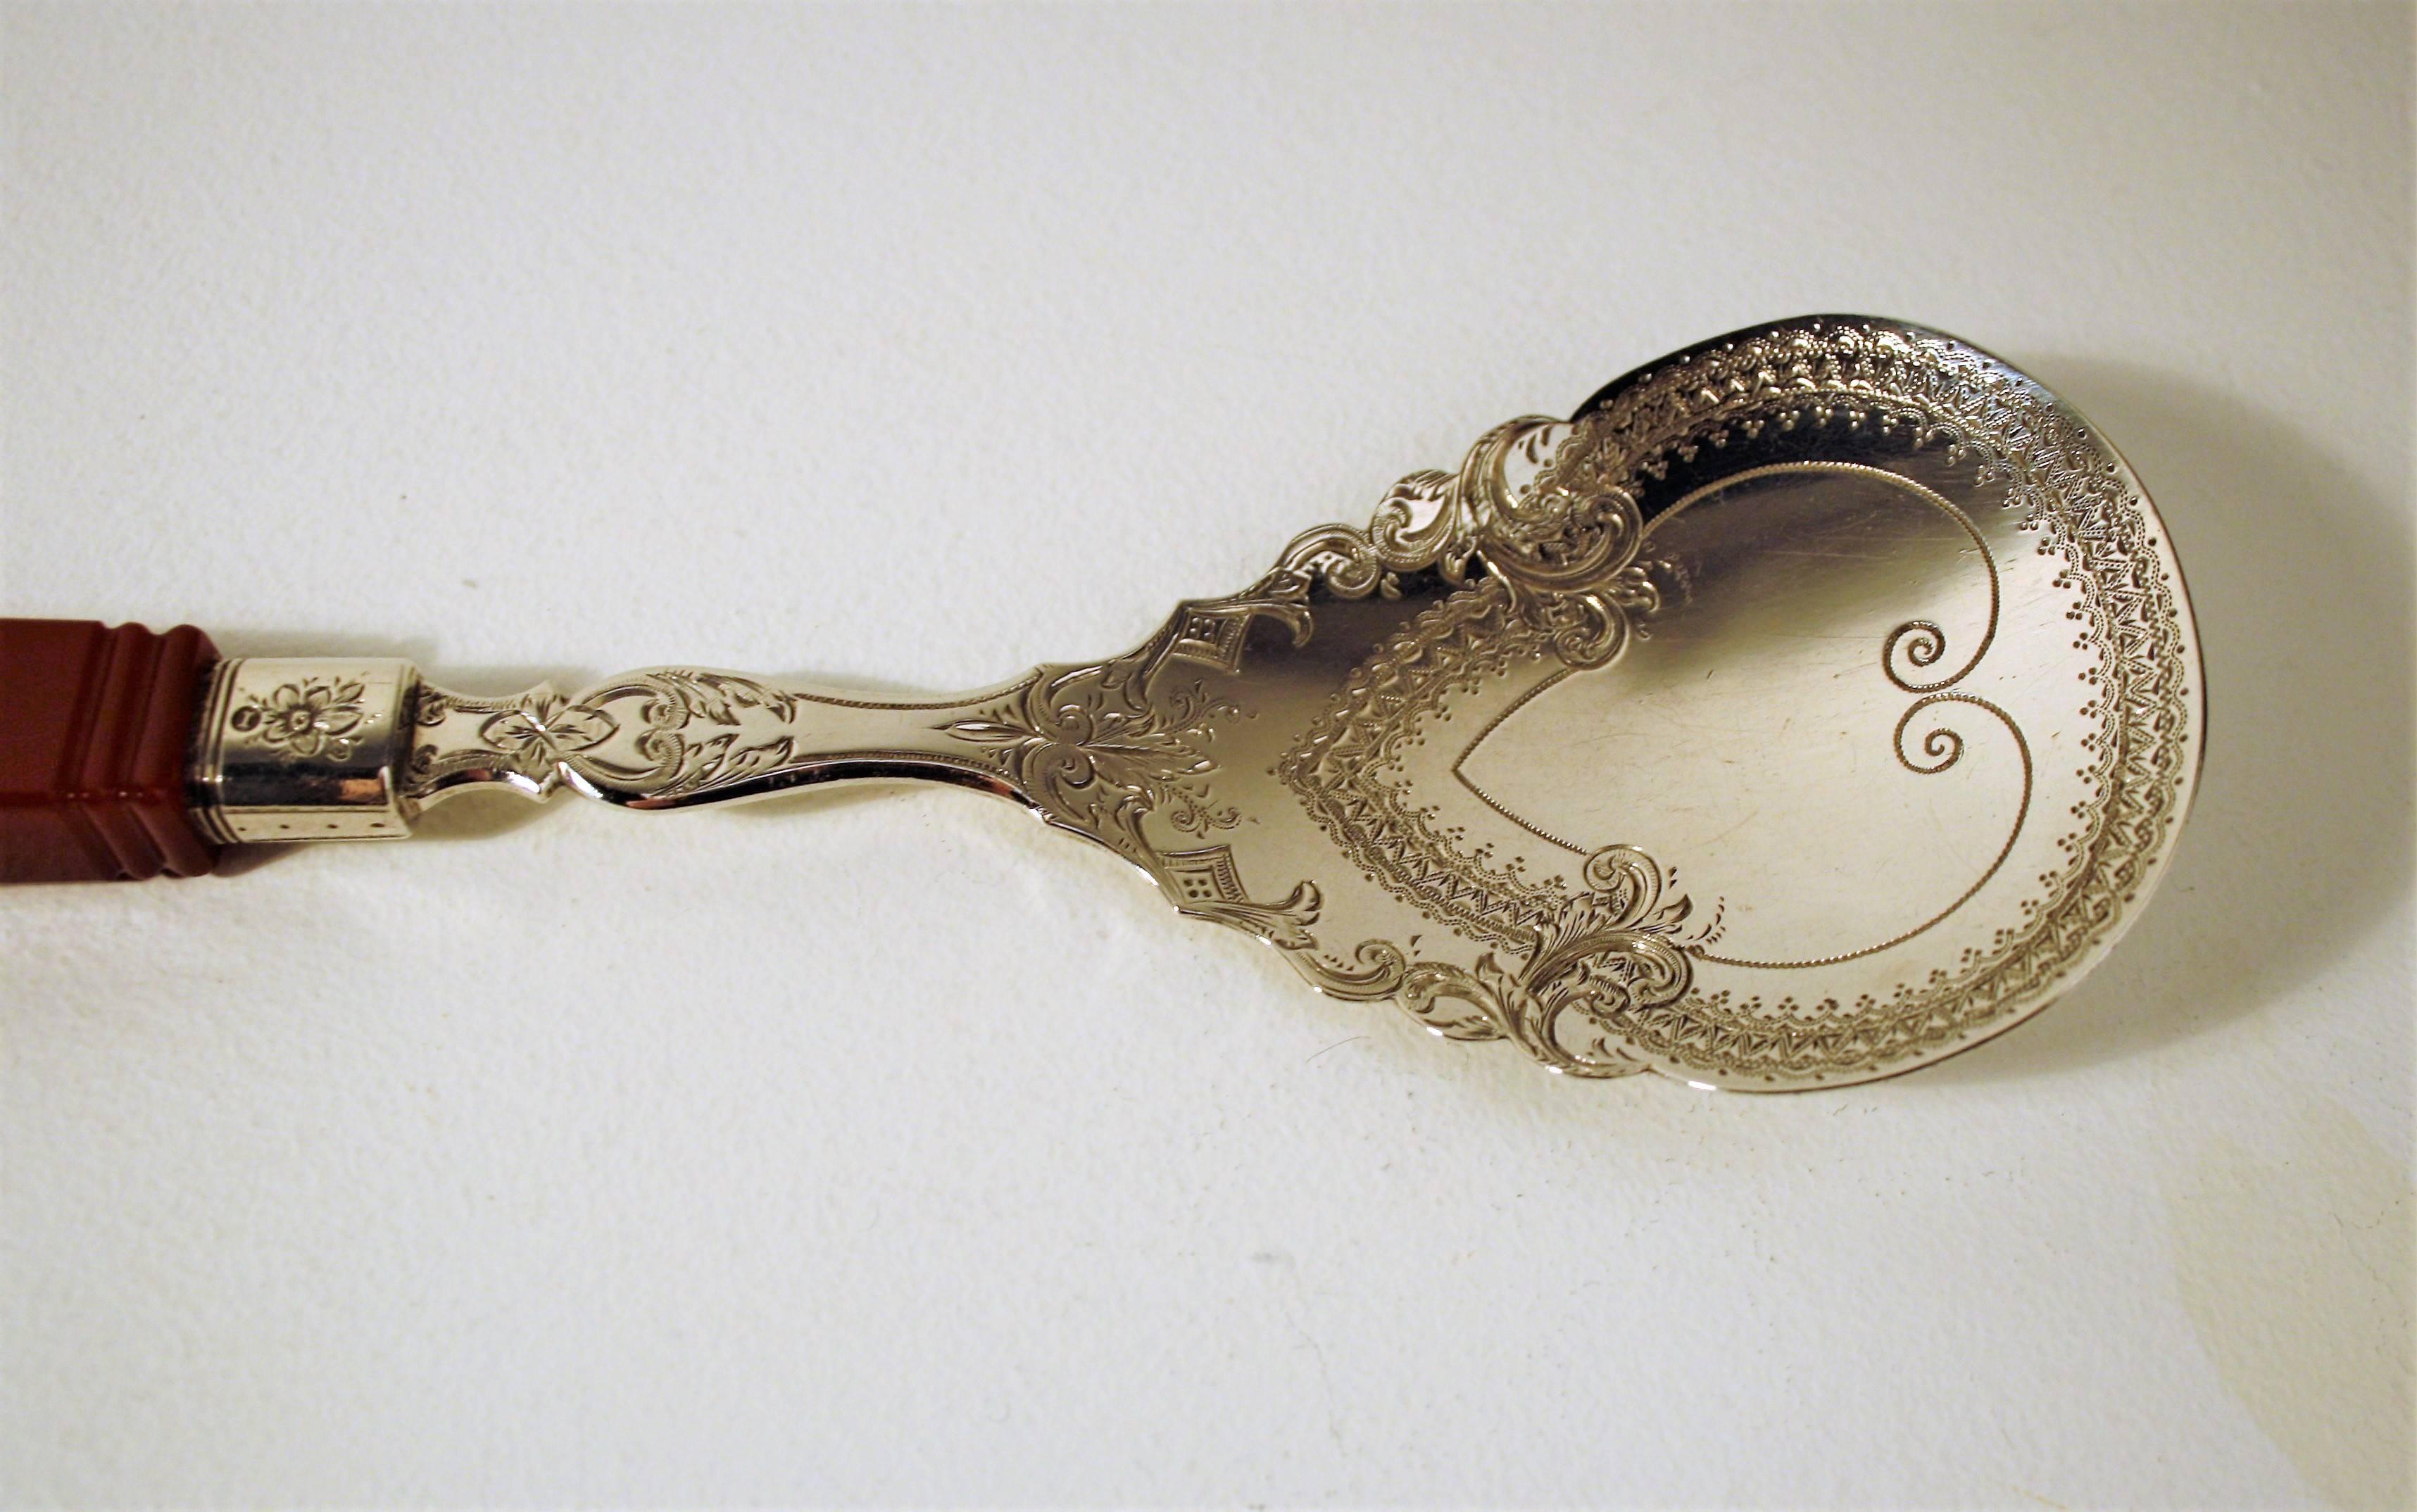 Exceptional fruit ladle in solid silver with Dutch hallmarks, silver 835, letter dated 1868.
The silver part is very finely chiseled and the handle is made of an exceptionally polished red Carnelion stone.